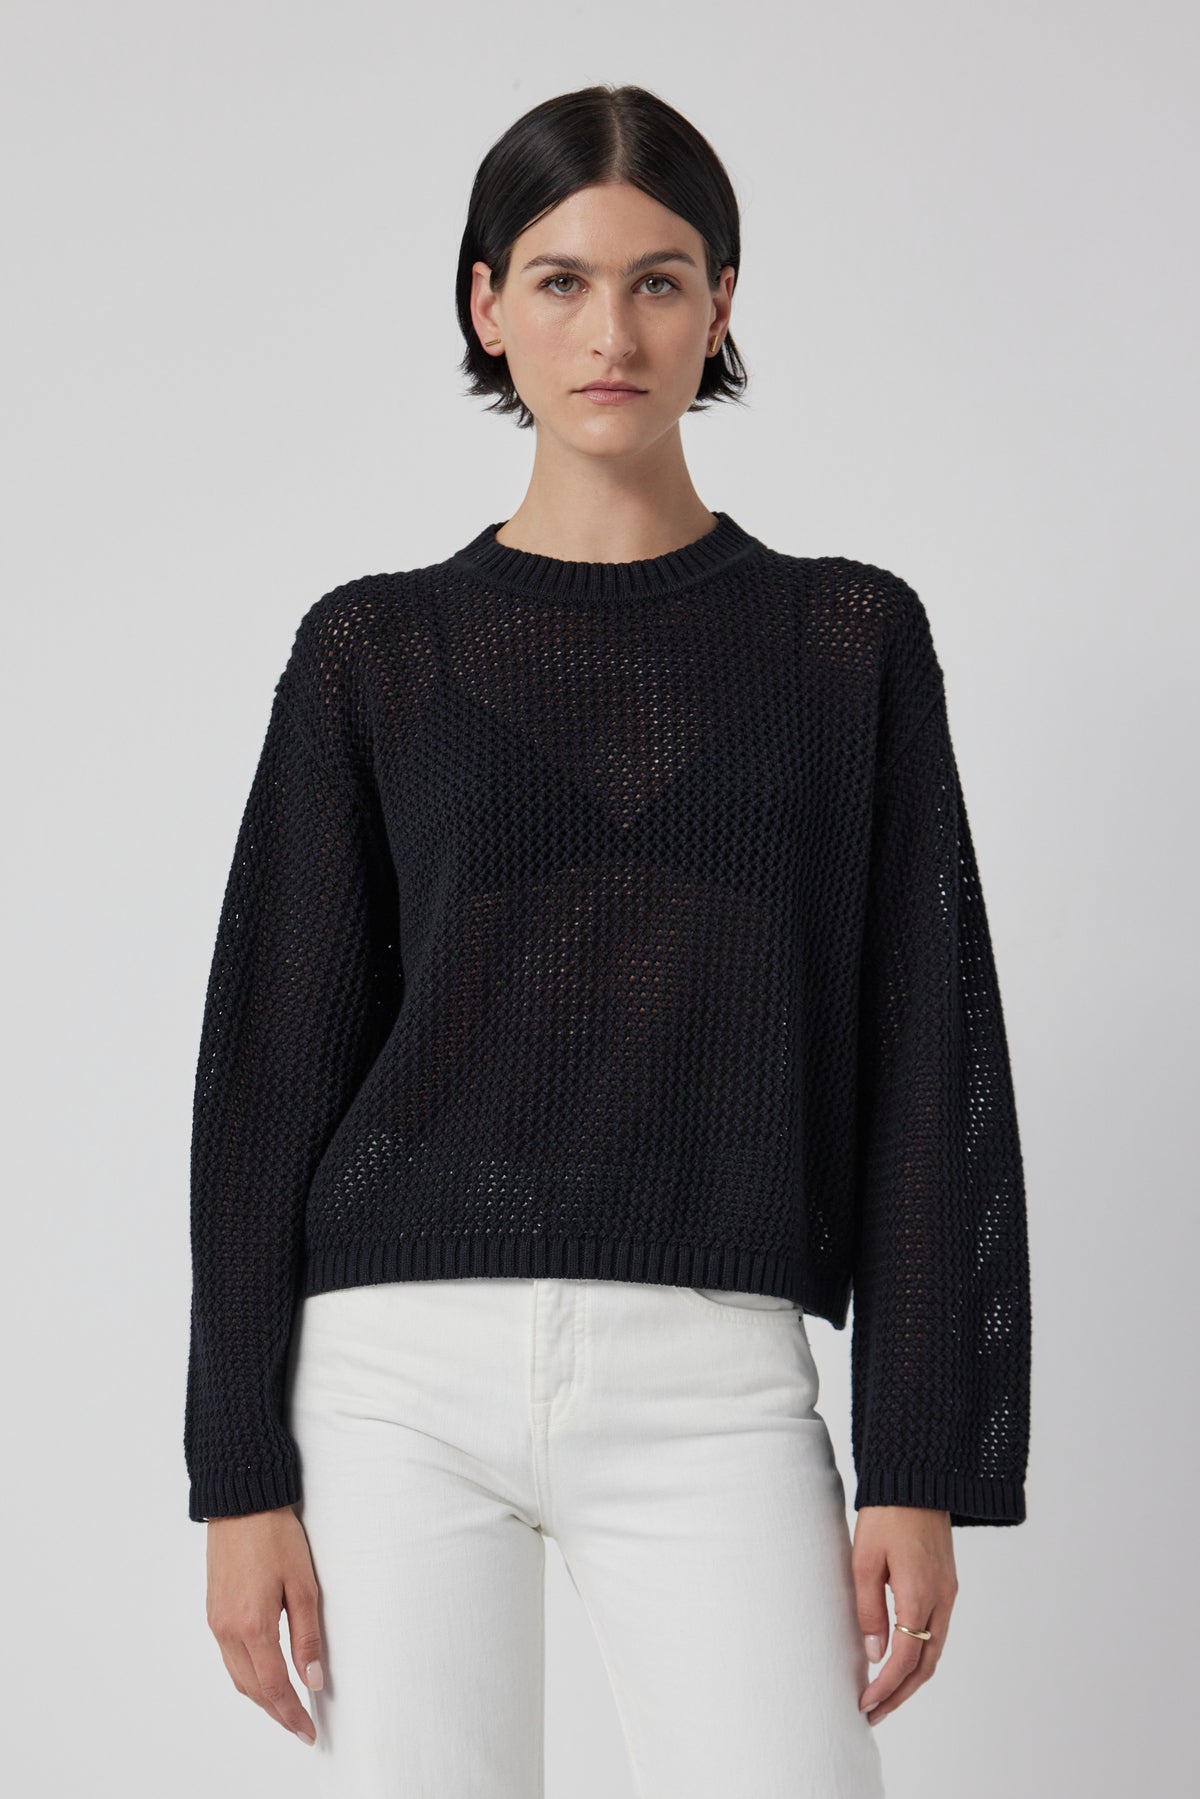 A model wearing a lightweight black KANAN SWEATER by Velvet by Jenny Graham and white jeans.-36168698396865